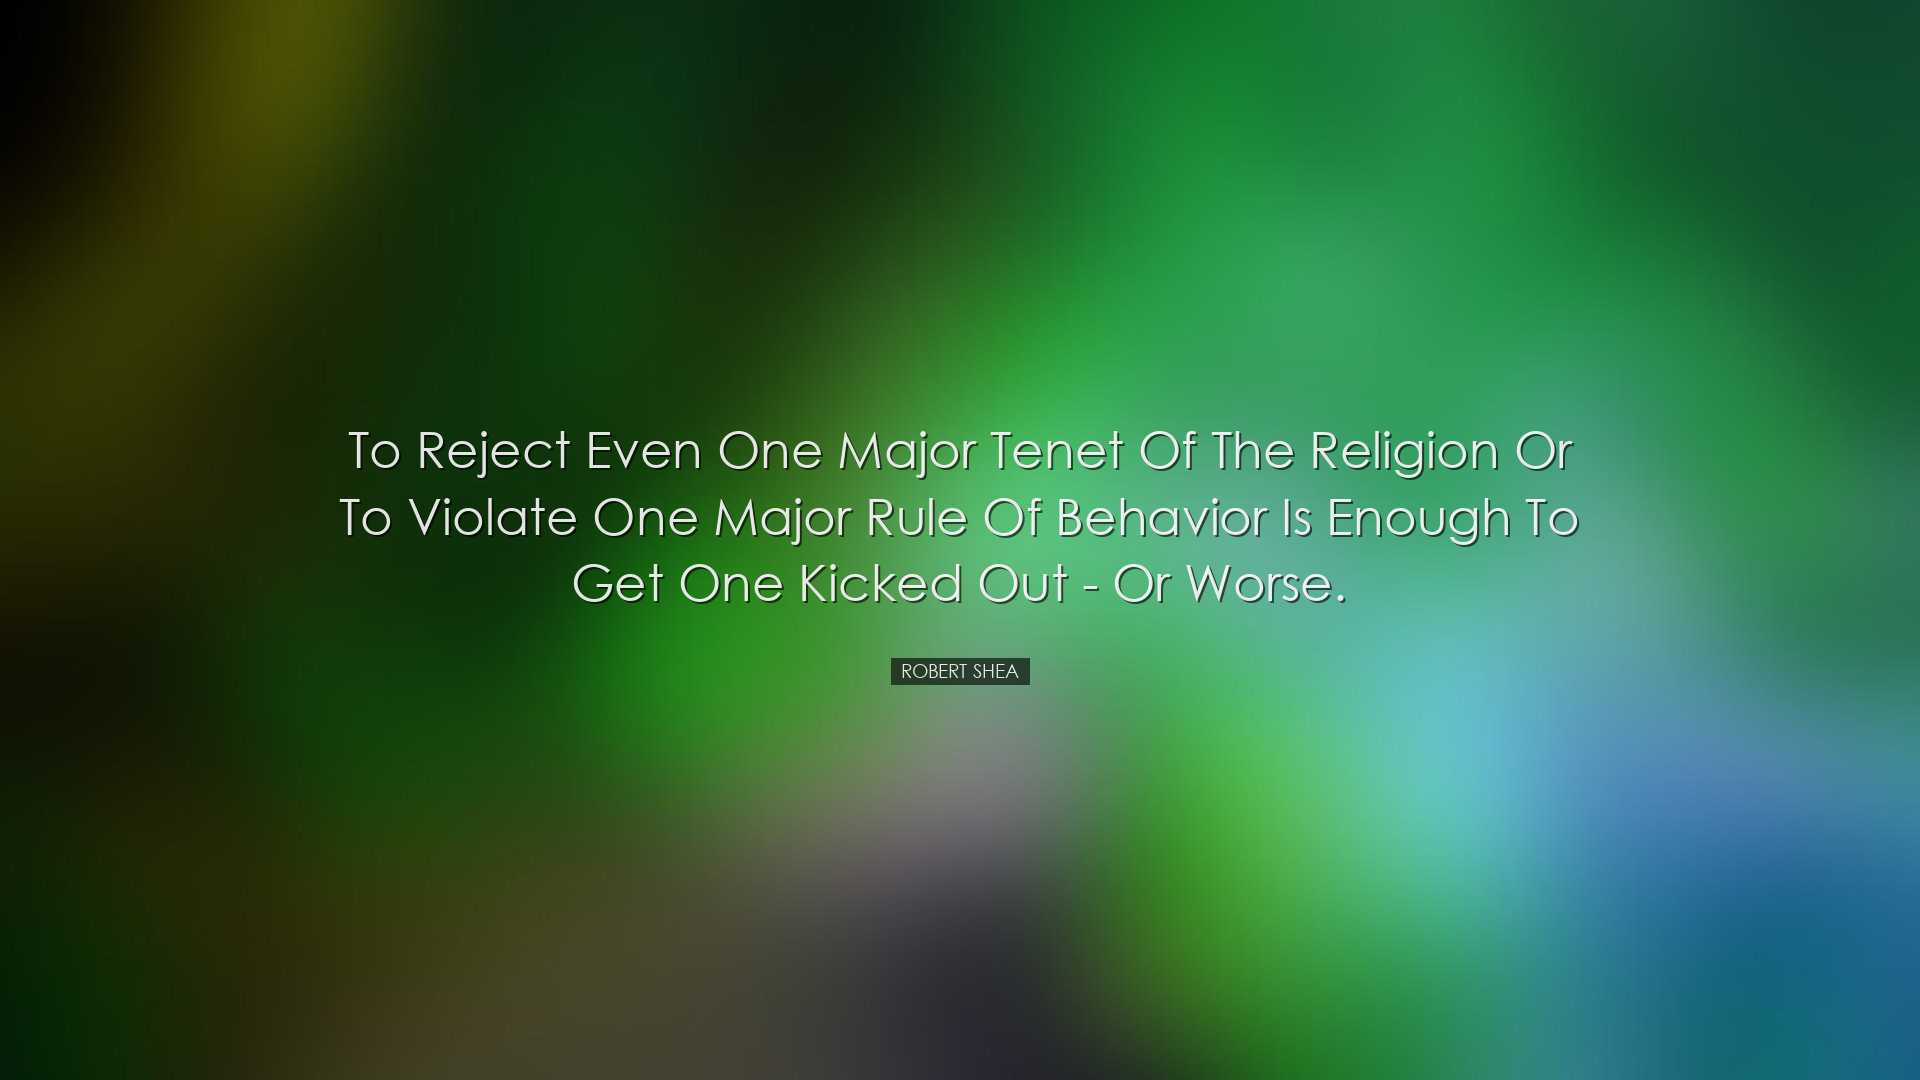 To reject even one major tenet of the religion or to violate one m